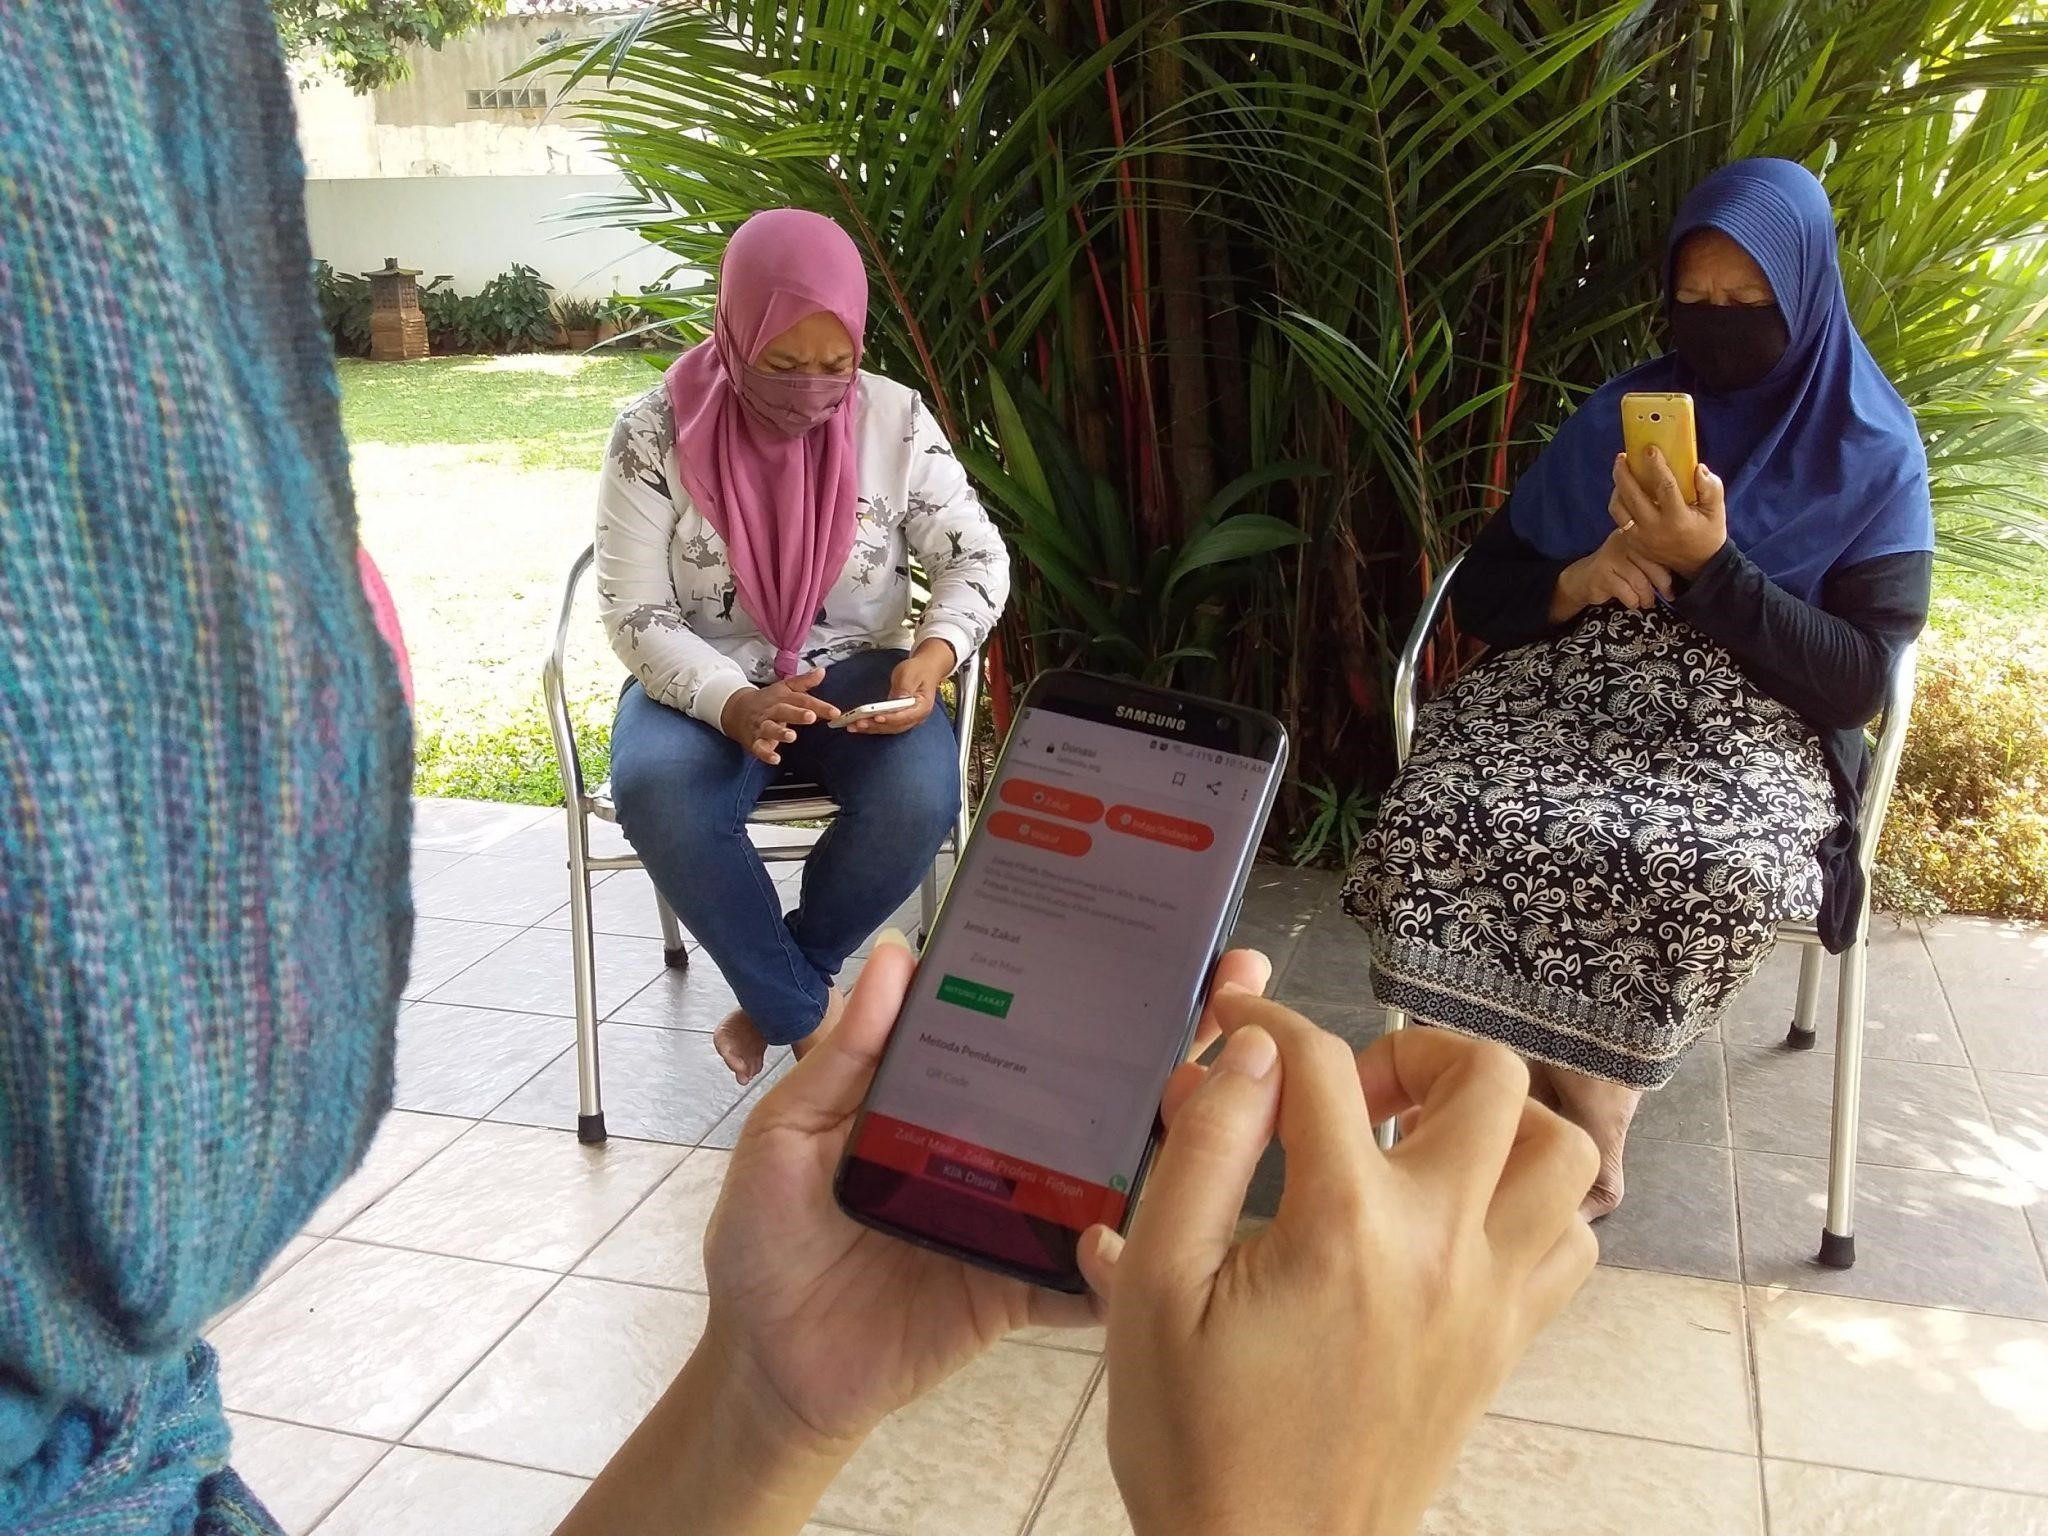 Figure 4: How to pay zakat? Ladies at Cidokom Bogor try to open an online zakat service. Photo © Amelia Fauzia

